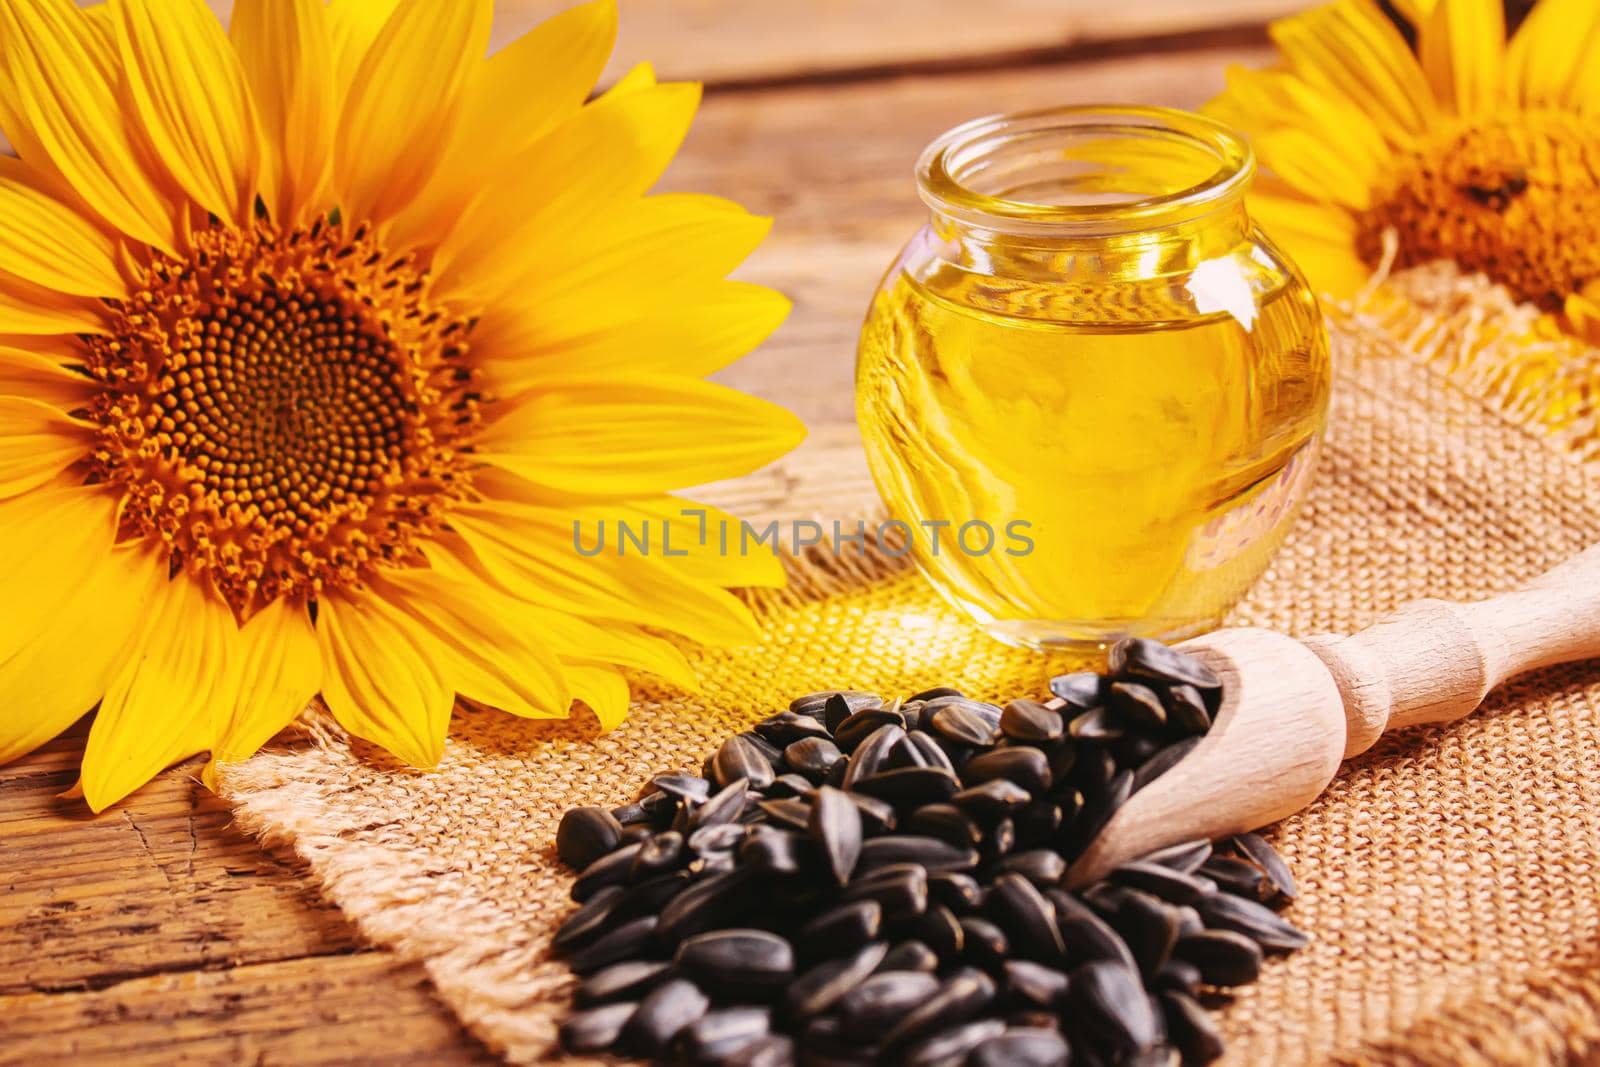 Sunflower seeds and oil bottle on old wooden background. Selective focus.nature